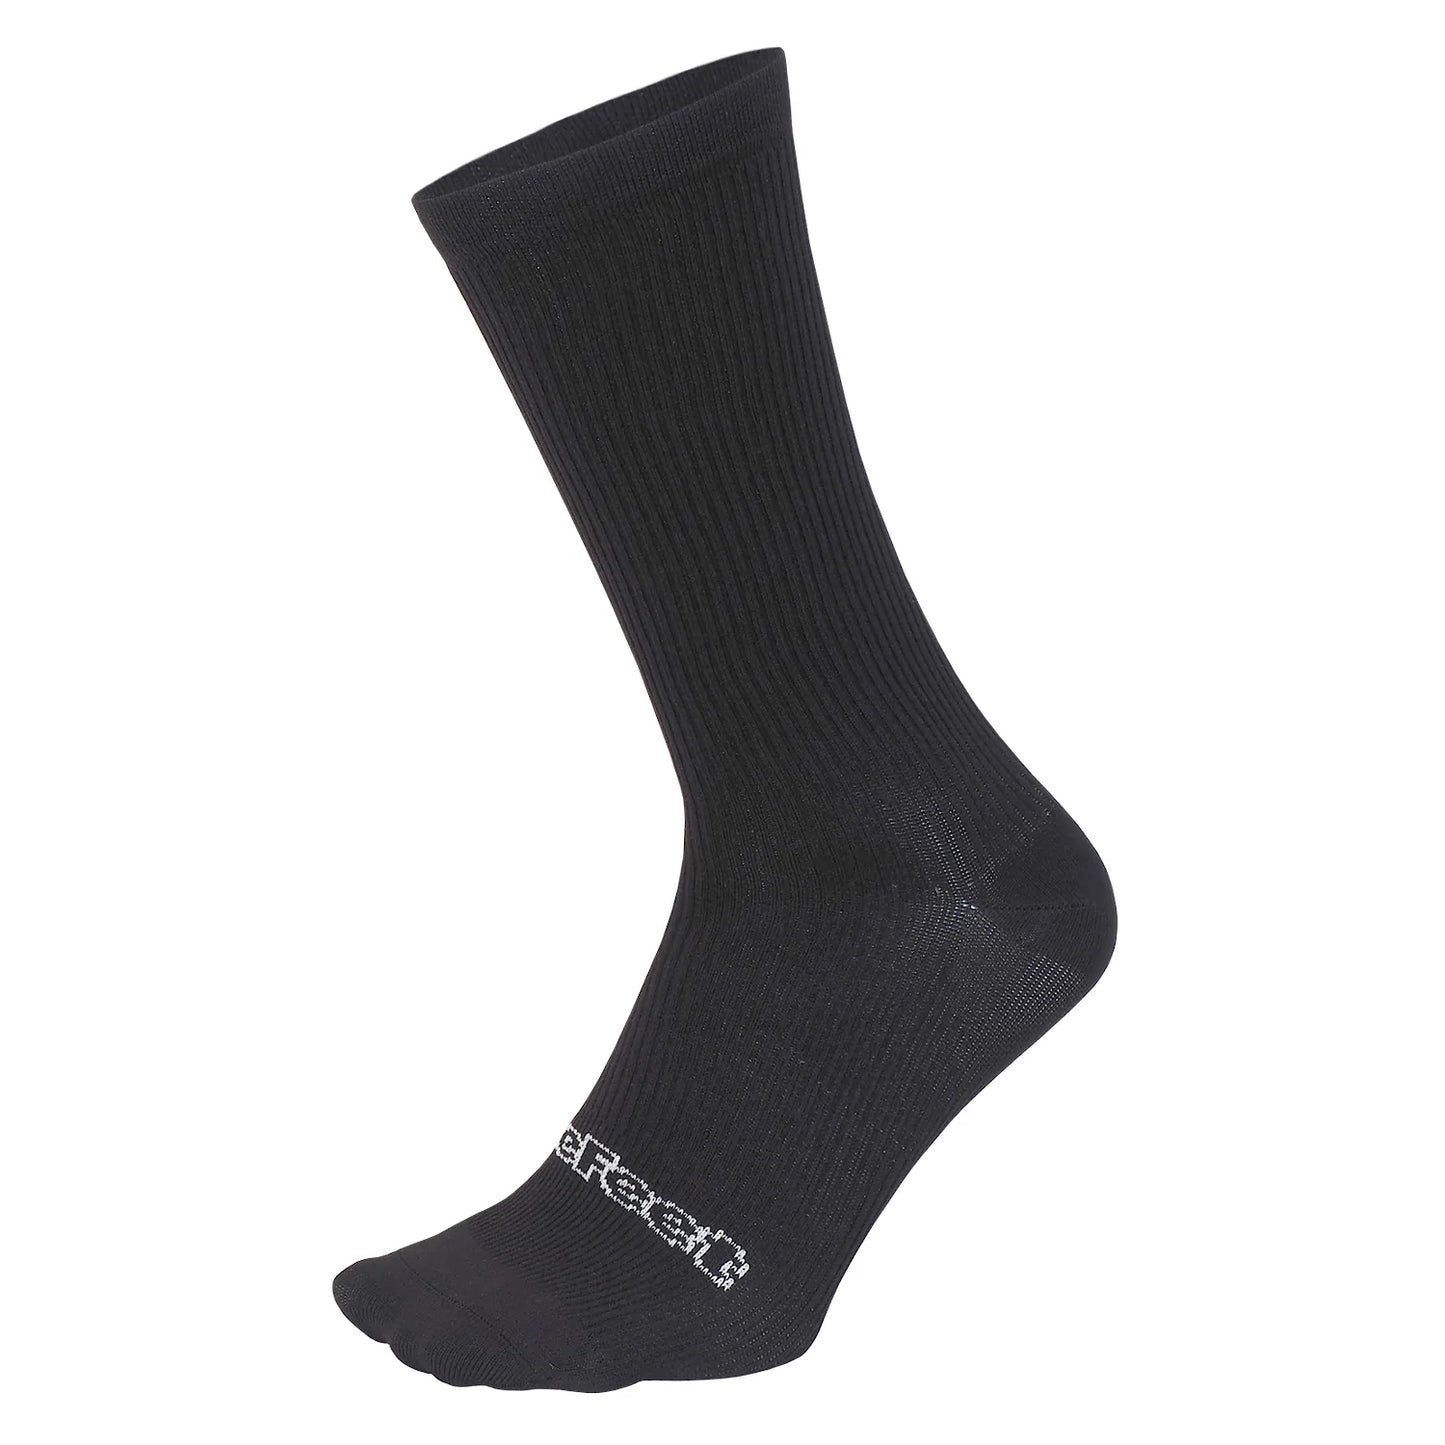 A single black DeFeet cycling sock with a ribbed cuff and foot